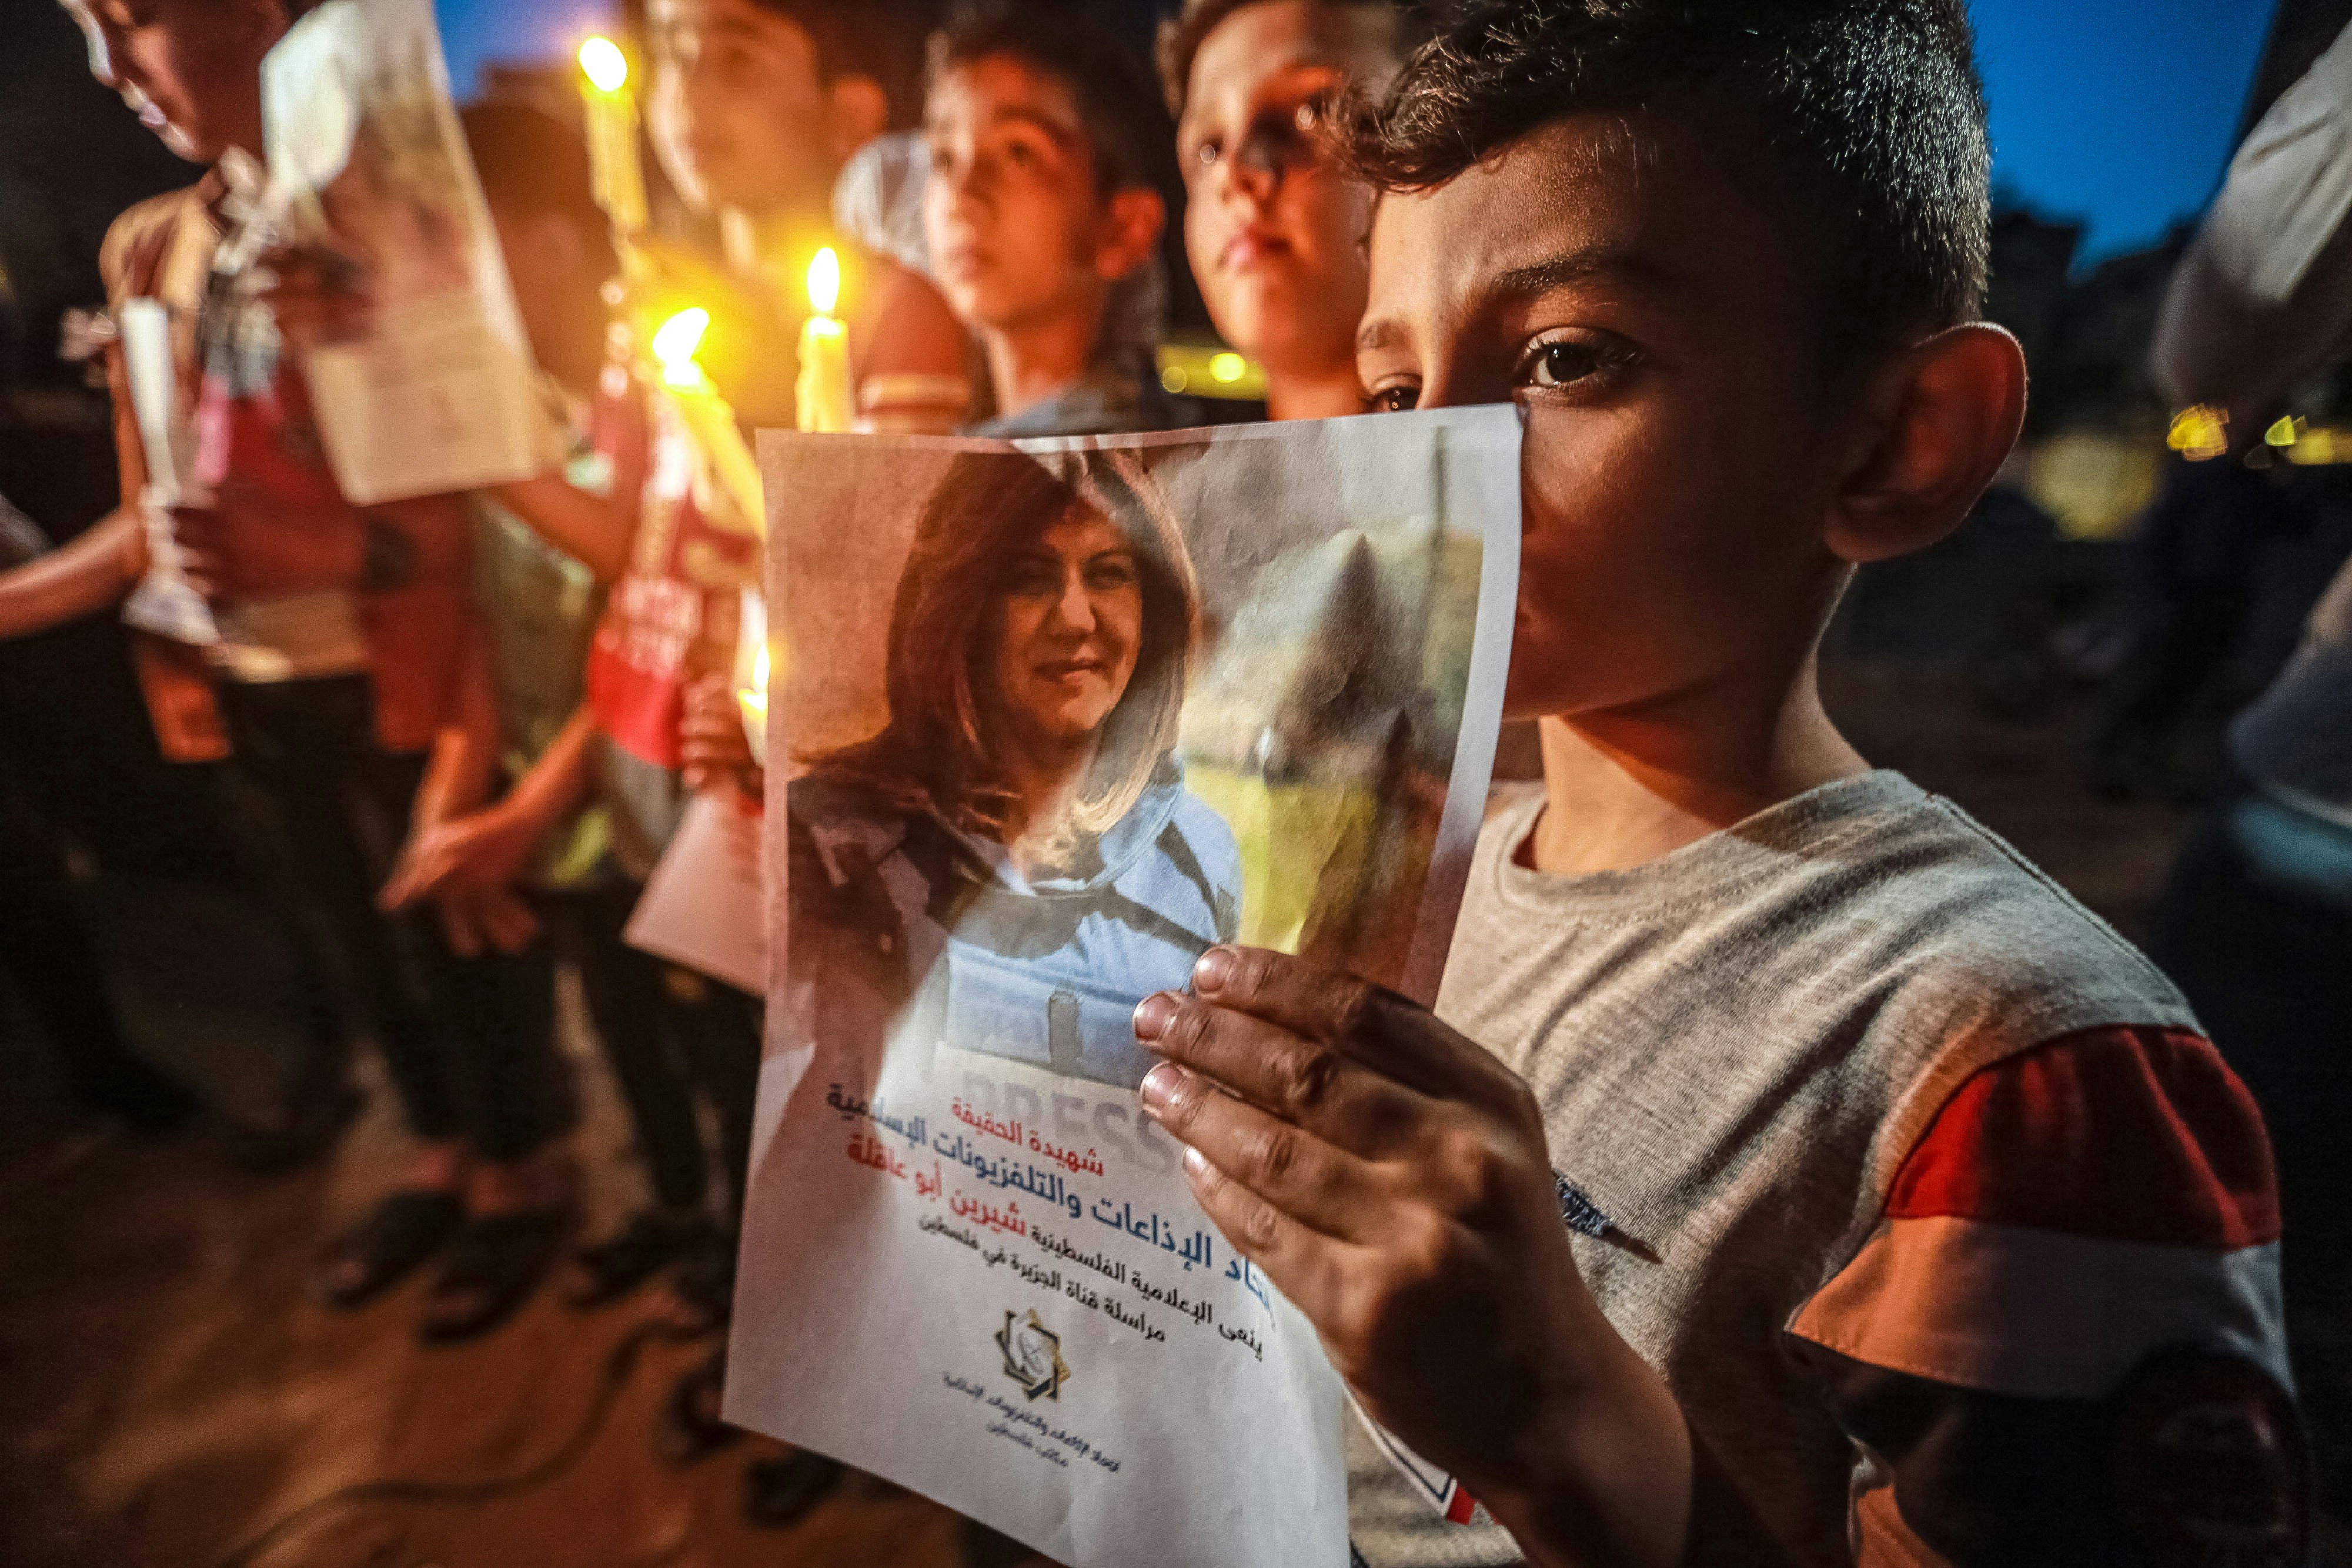 11 May 2022, Palestinian Territories, Gaza City: Children take part in a candlelight vigil to denounce the killing of Al Jazeera reporter Shireen Abu Akleh. Abu Akleh, 51, a prominent figure in the Arabic news service of the Al-Jazeera channel, was shot dead earlier today during a confrontation between Israeli soldiers and Palestinians in the West Bank city of Jenin. Photo: Mohammed Talatene/dpa (Photo by Mohammed Talatene/picture alliance via Getty Images)